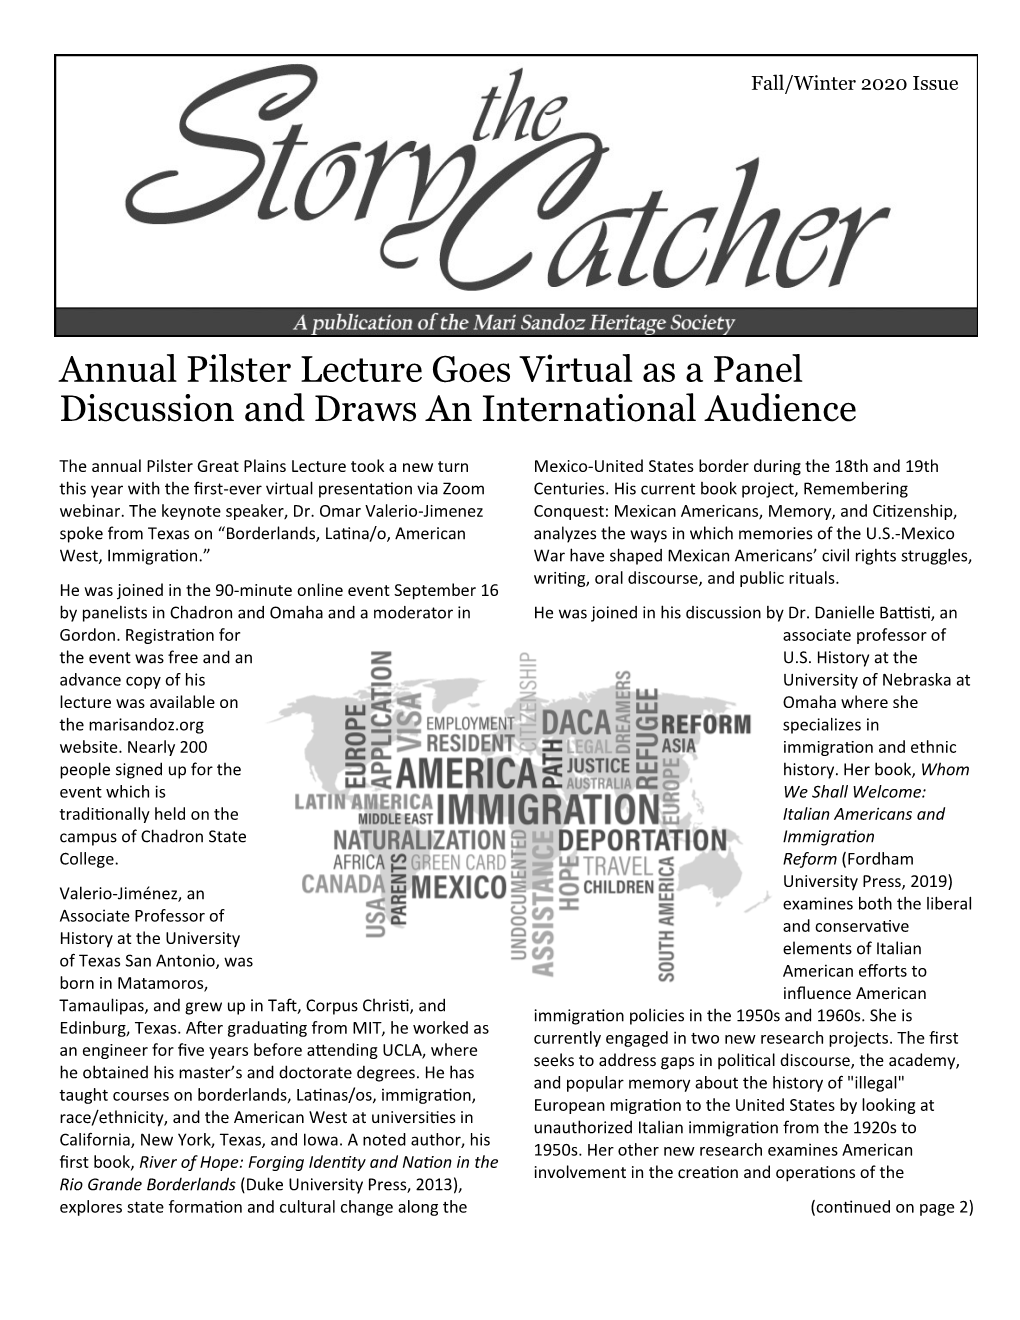 Annual Pilster Lecture Goes Virtual As a Panel Discussion and Draws an International Audience